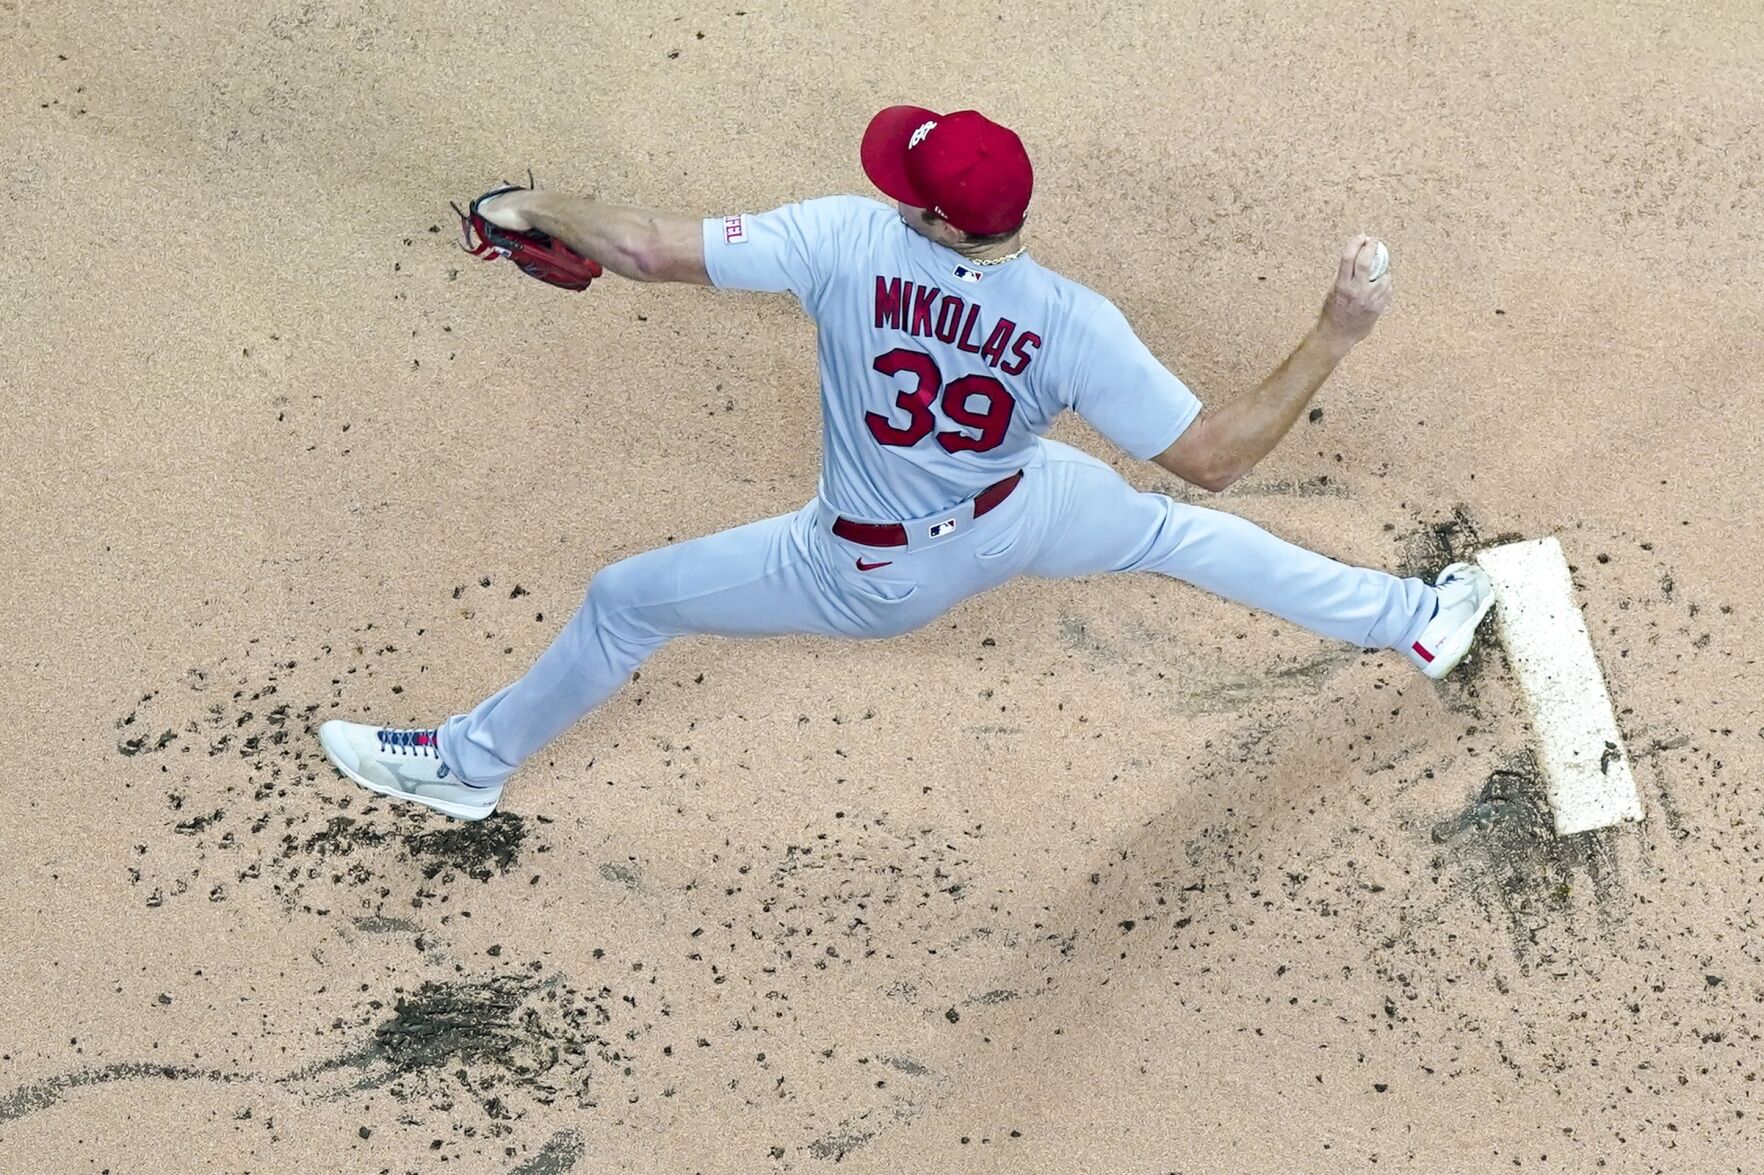 Cardinals, Miles Mikolas delay Brewers clinching NL Central crown, but cannot stop it